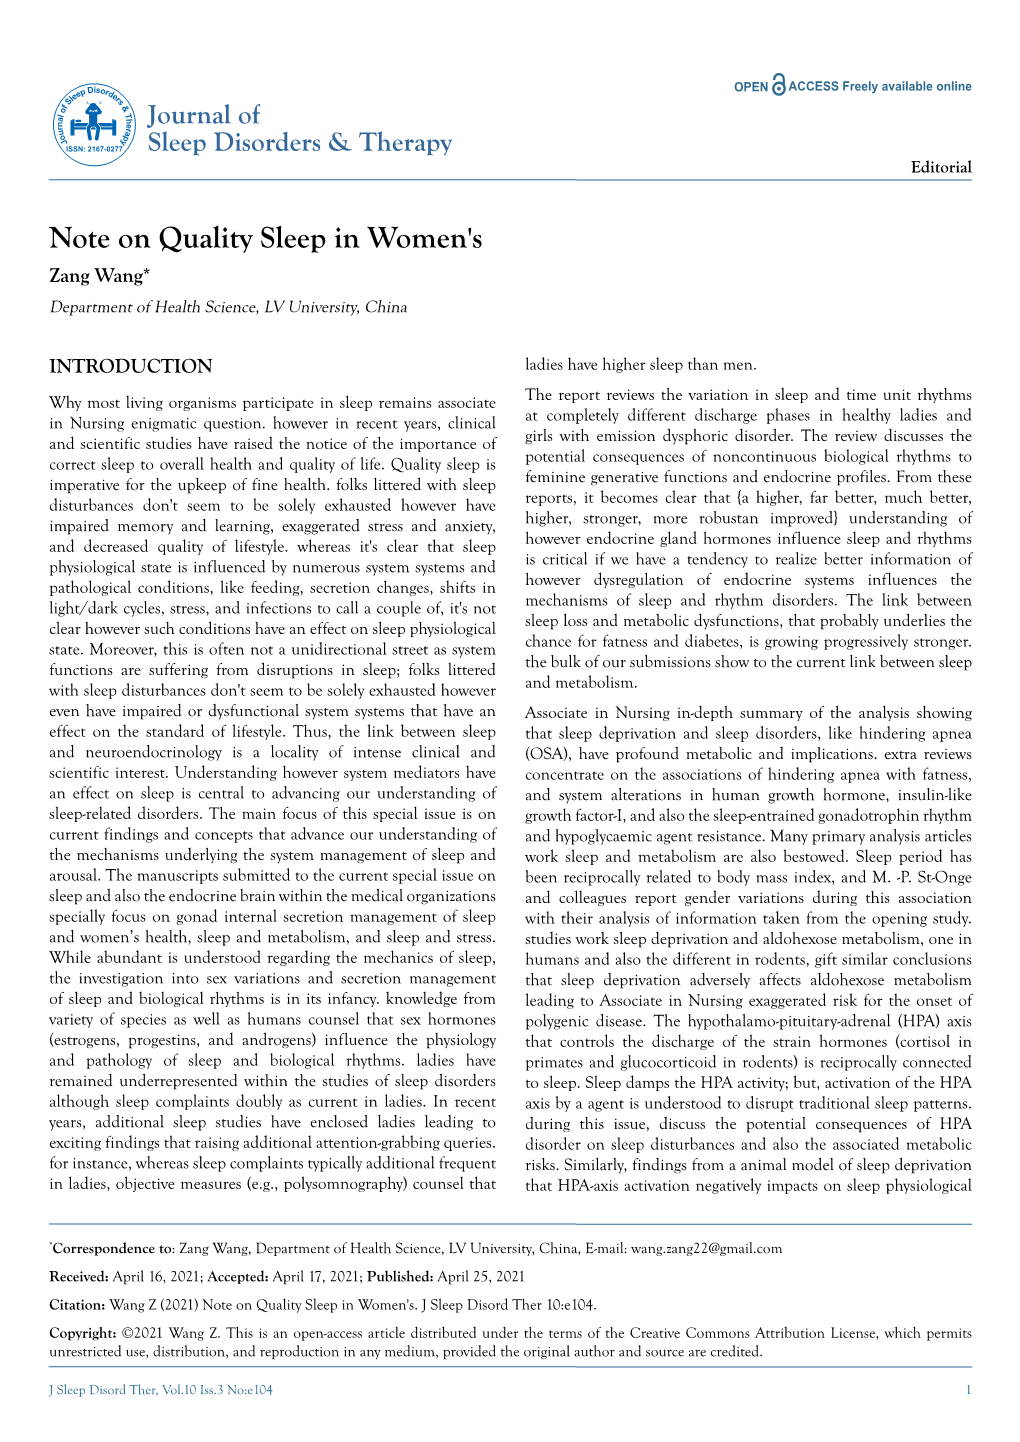 Note on Quality Sleep in Women's Zang Wang* Department of Health Science, LV University, China